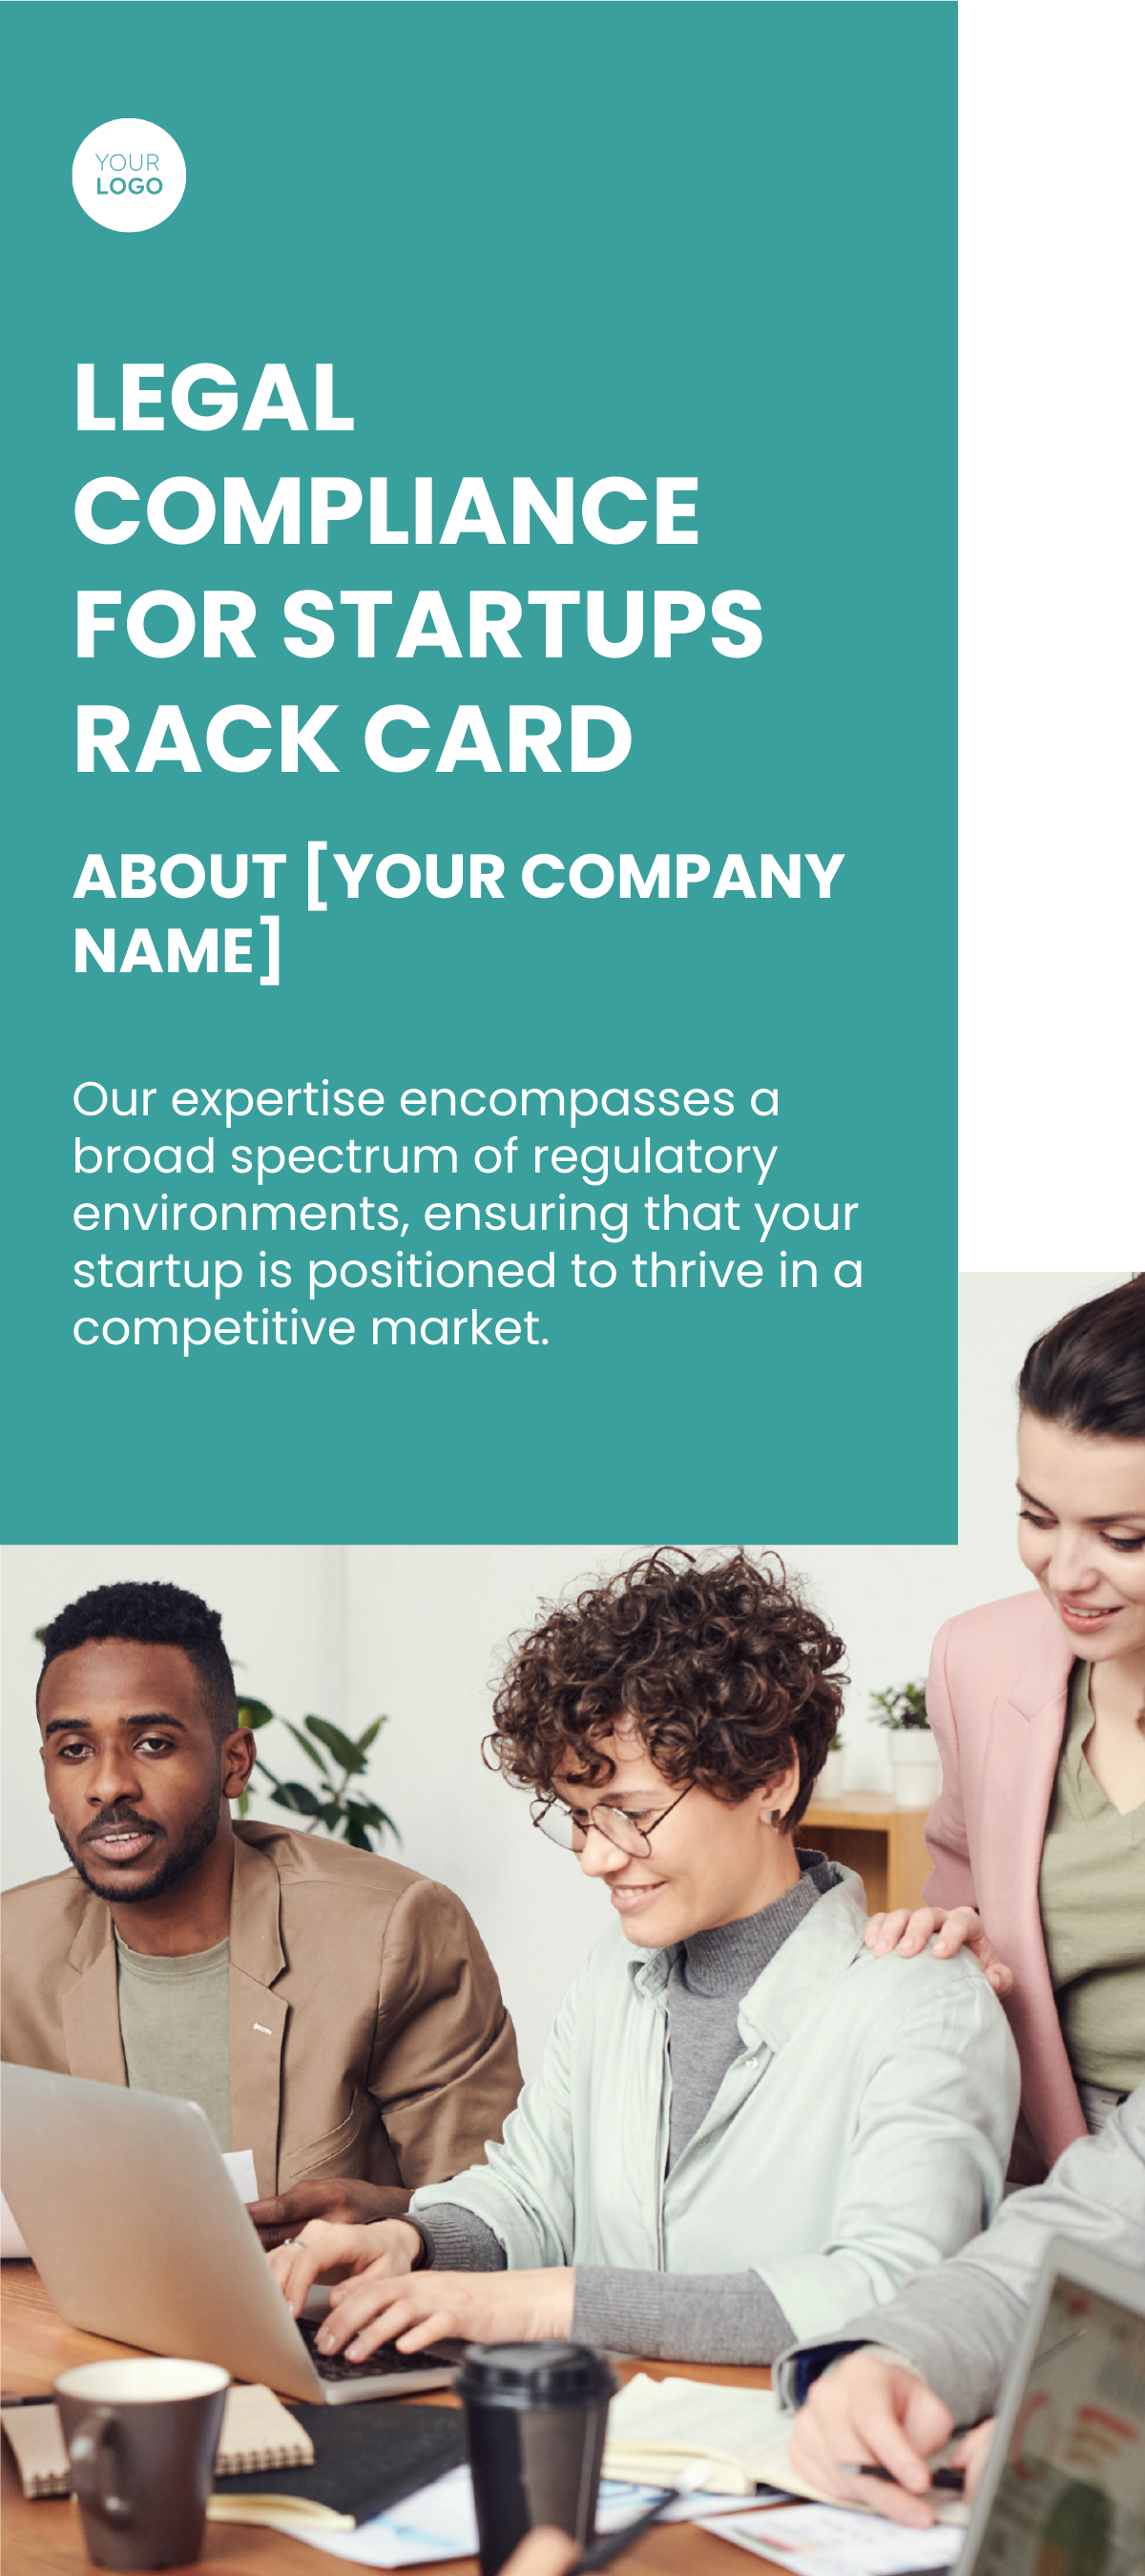 Legal Compliance for Startups Rack Card